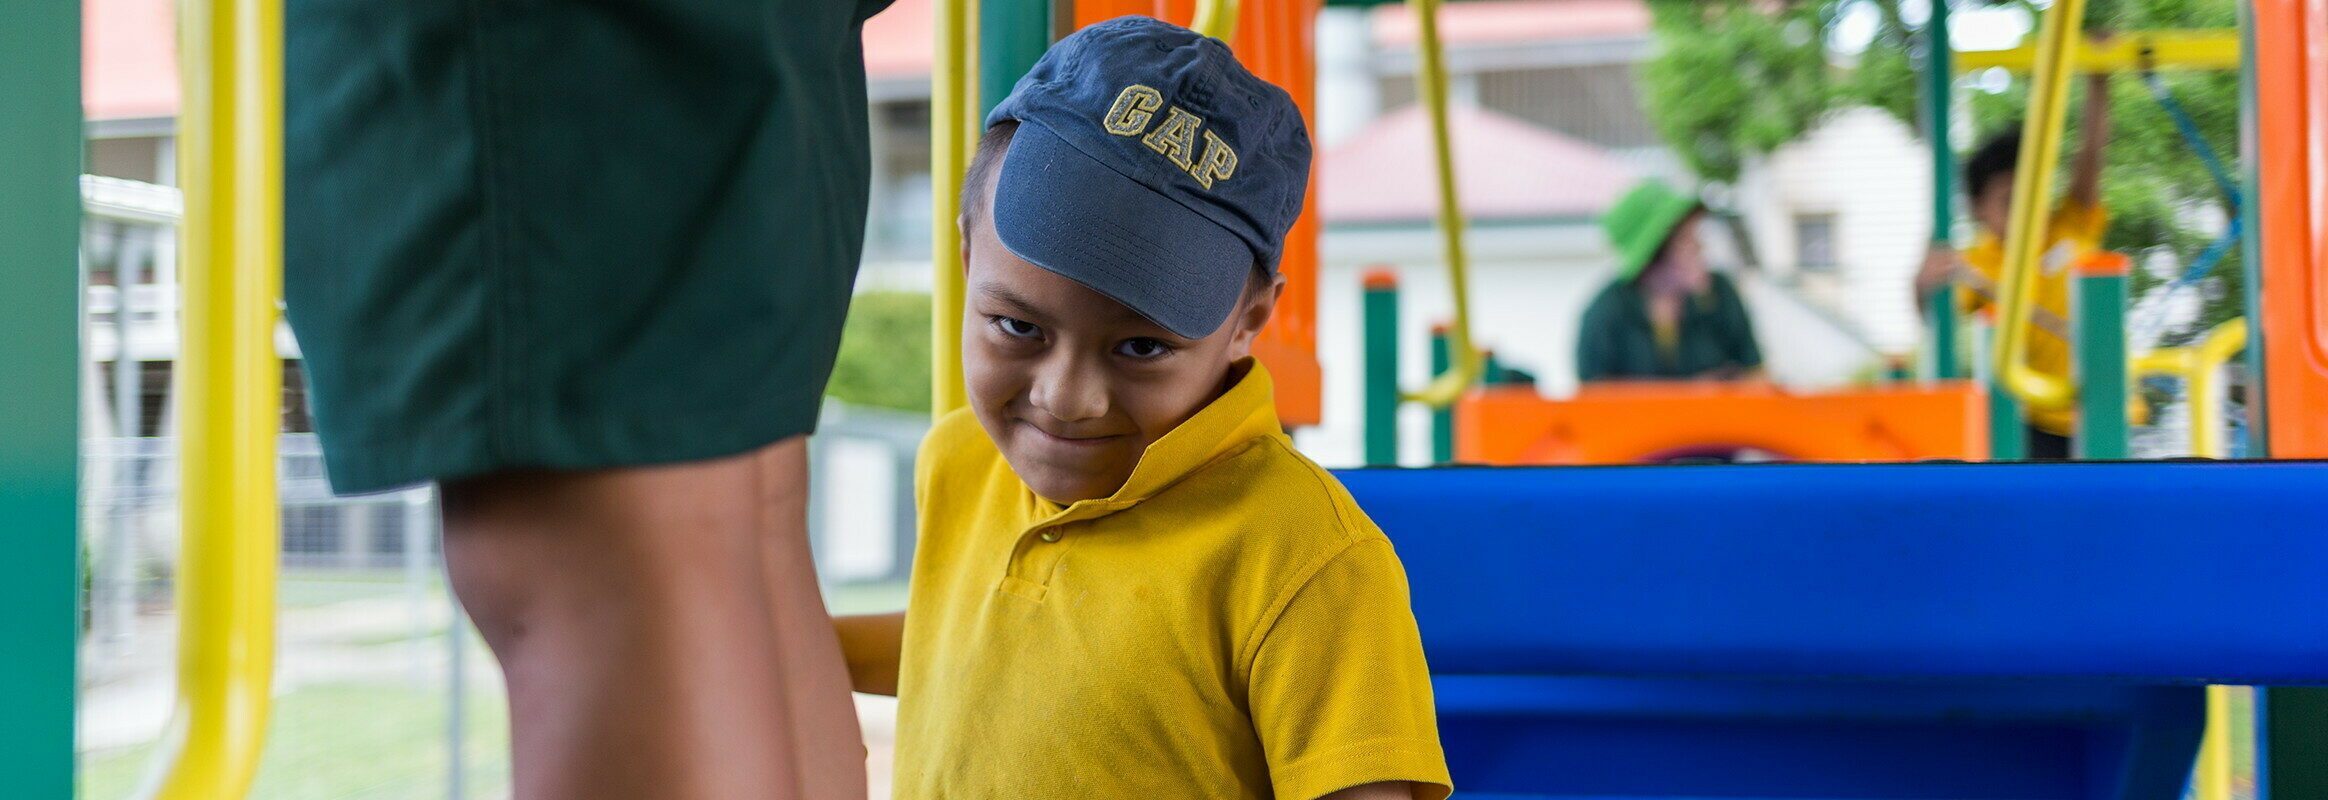 Monty, a young Samoan boy on a playground, smiling at the camera